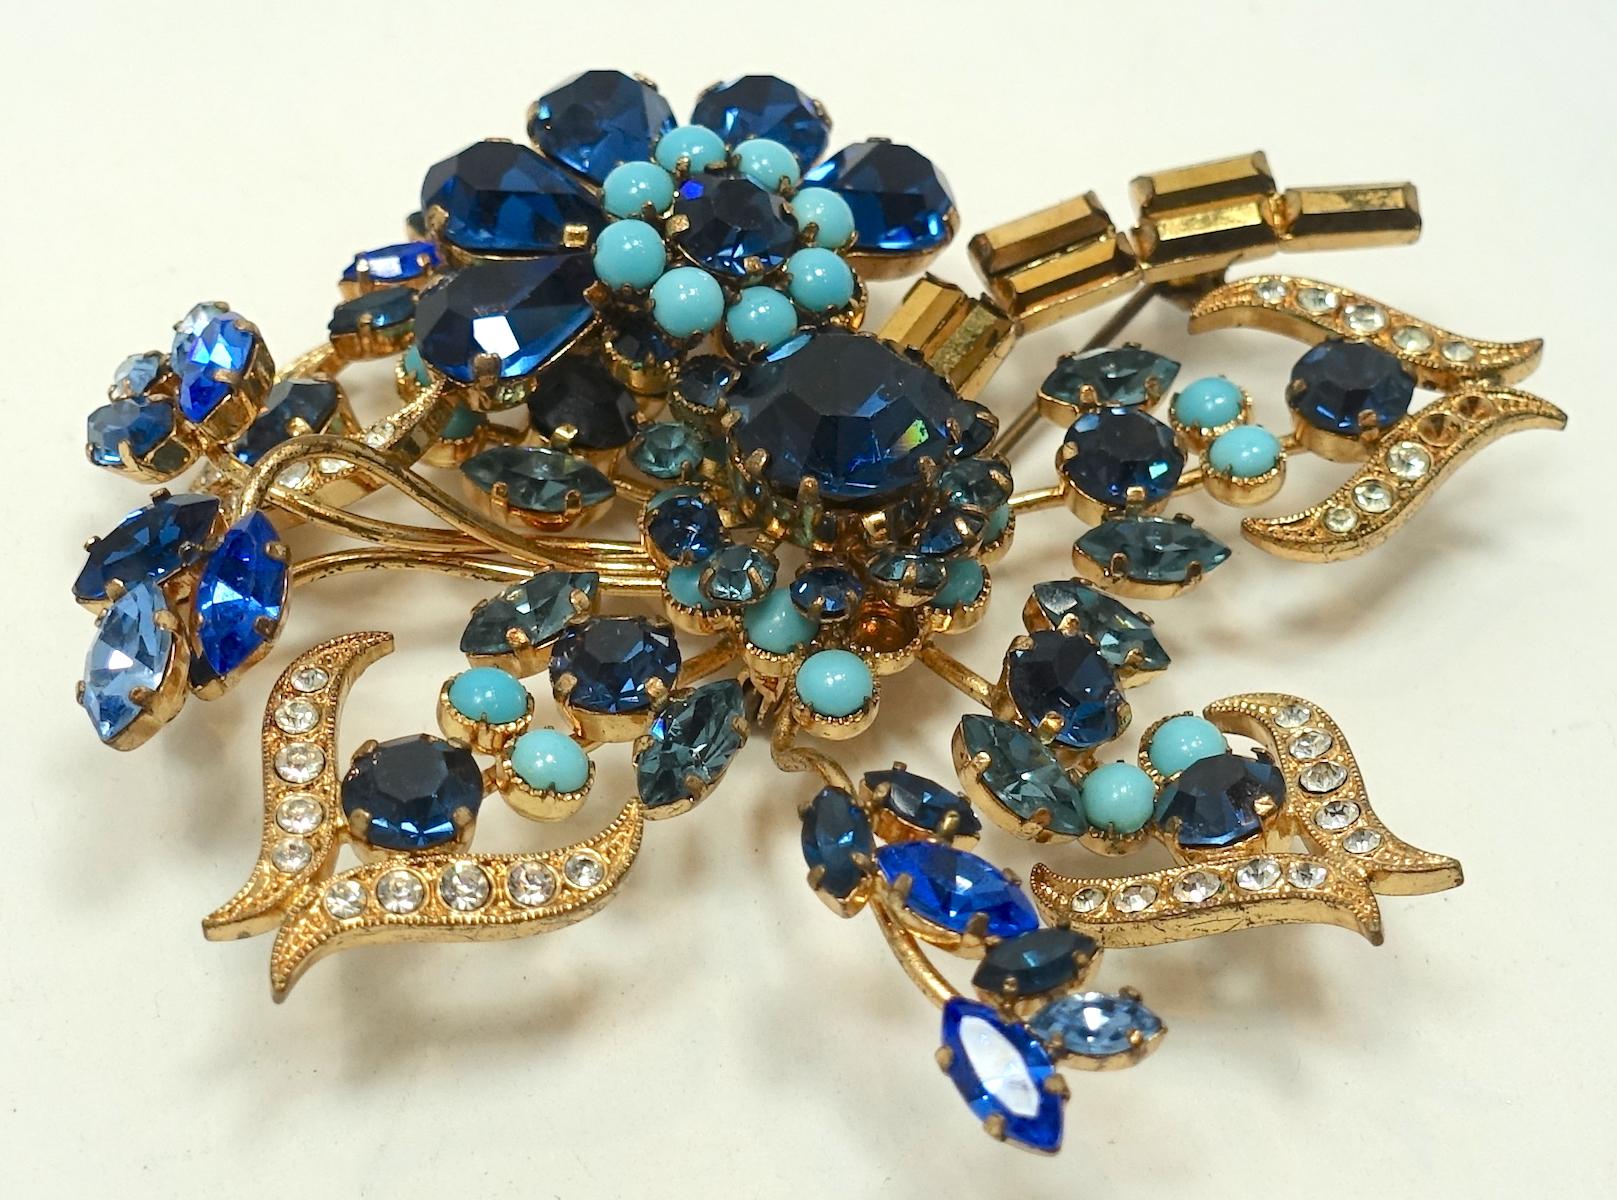 This vintage signed Model Maryse Blanchard Paris brooch has a floral design with blue, turquoise and clear crystals in a gold tone setting.  In excellent condition, this brooch measures 3” x 3” and has two signatures …  “Made in Austria” and “Model